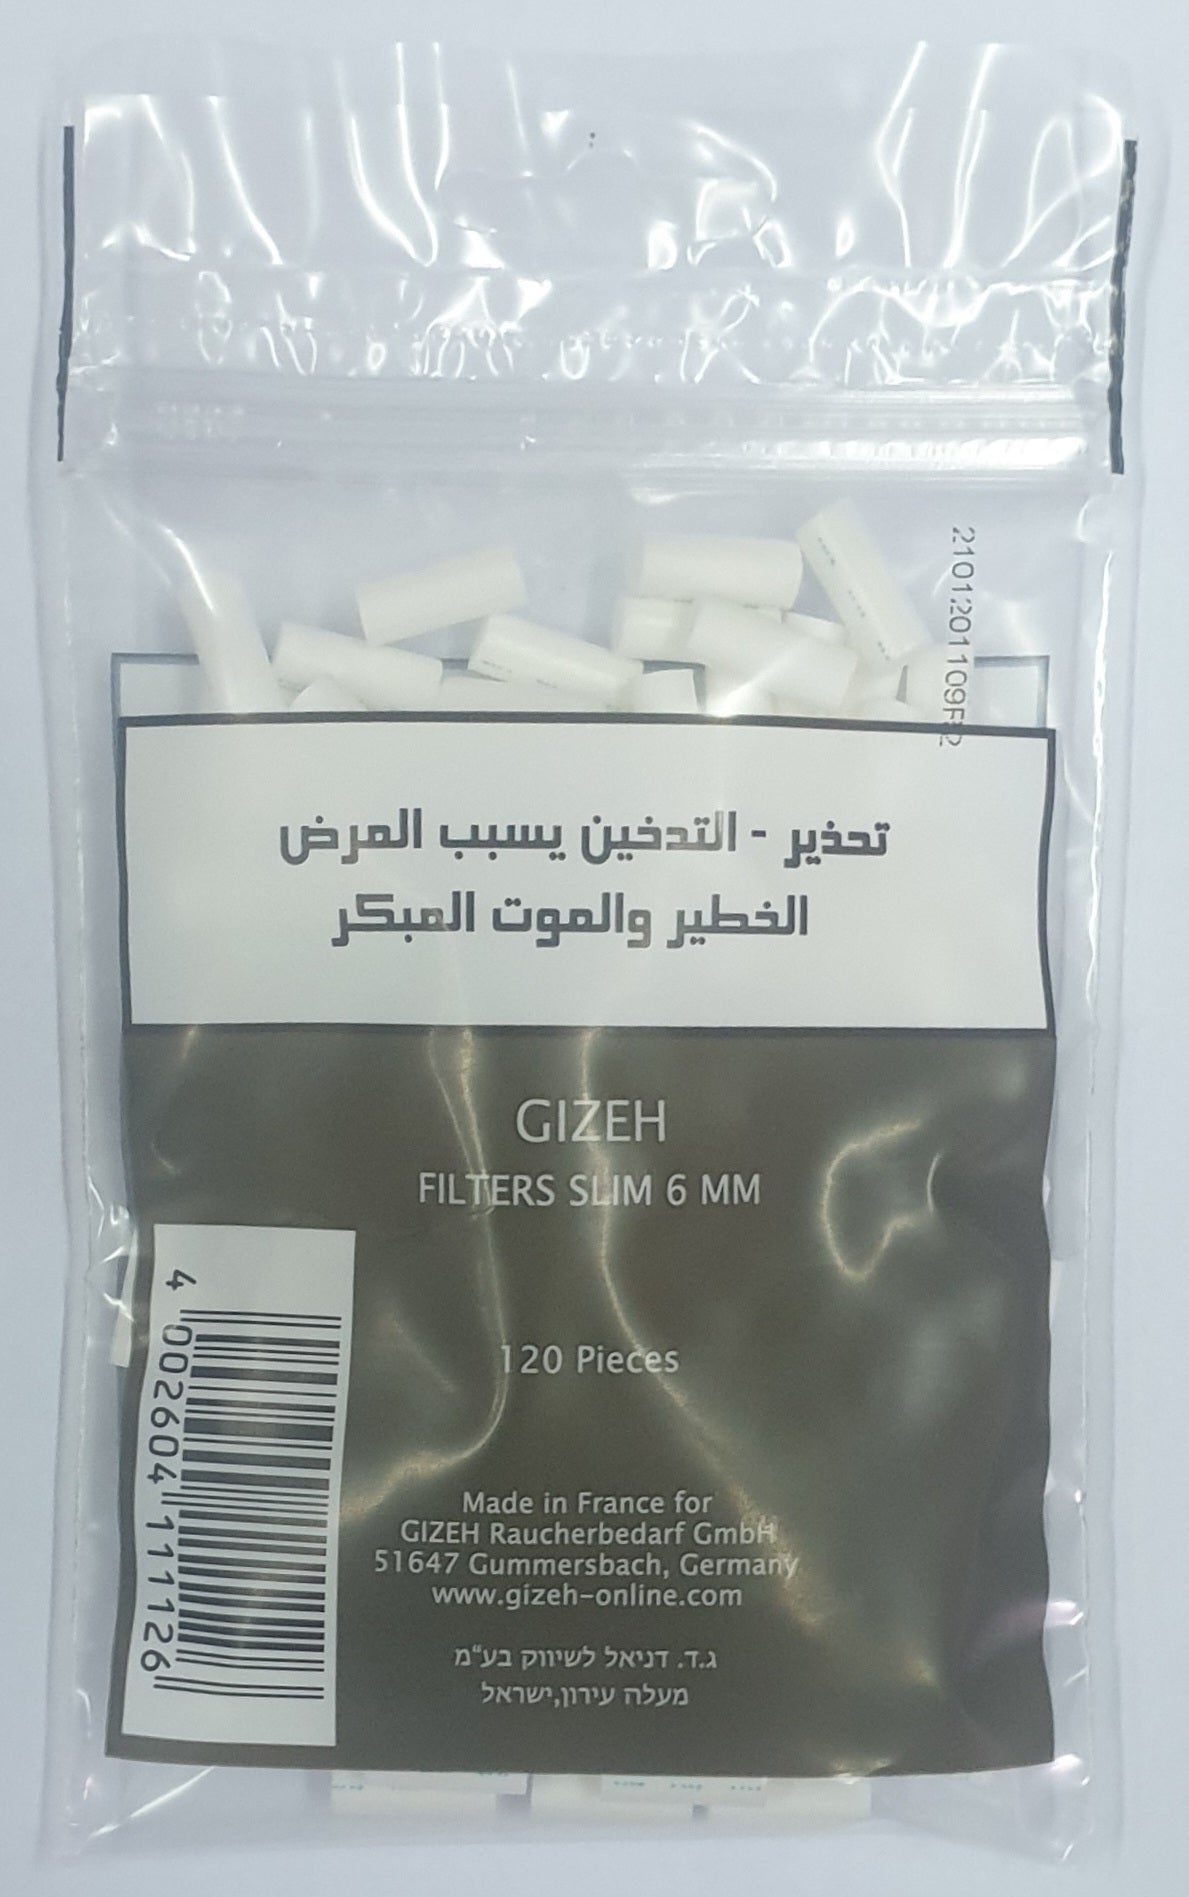 Gizeh 415925015 20 Bags x 100 Filters white XL Slim Filter Diameter 6 mm  Length 19 mm